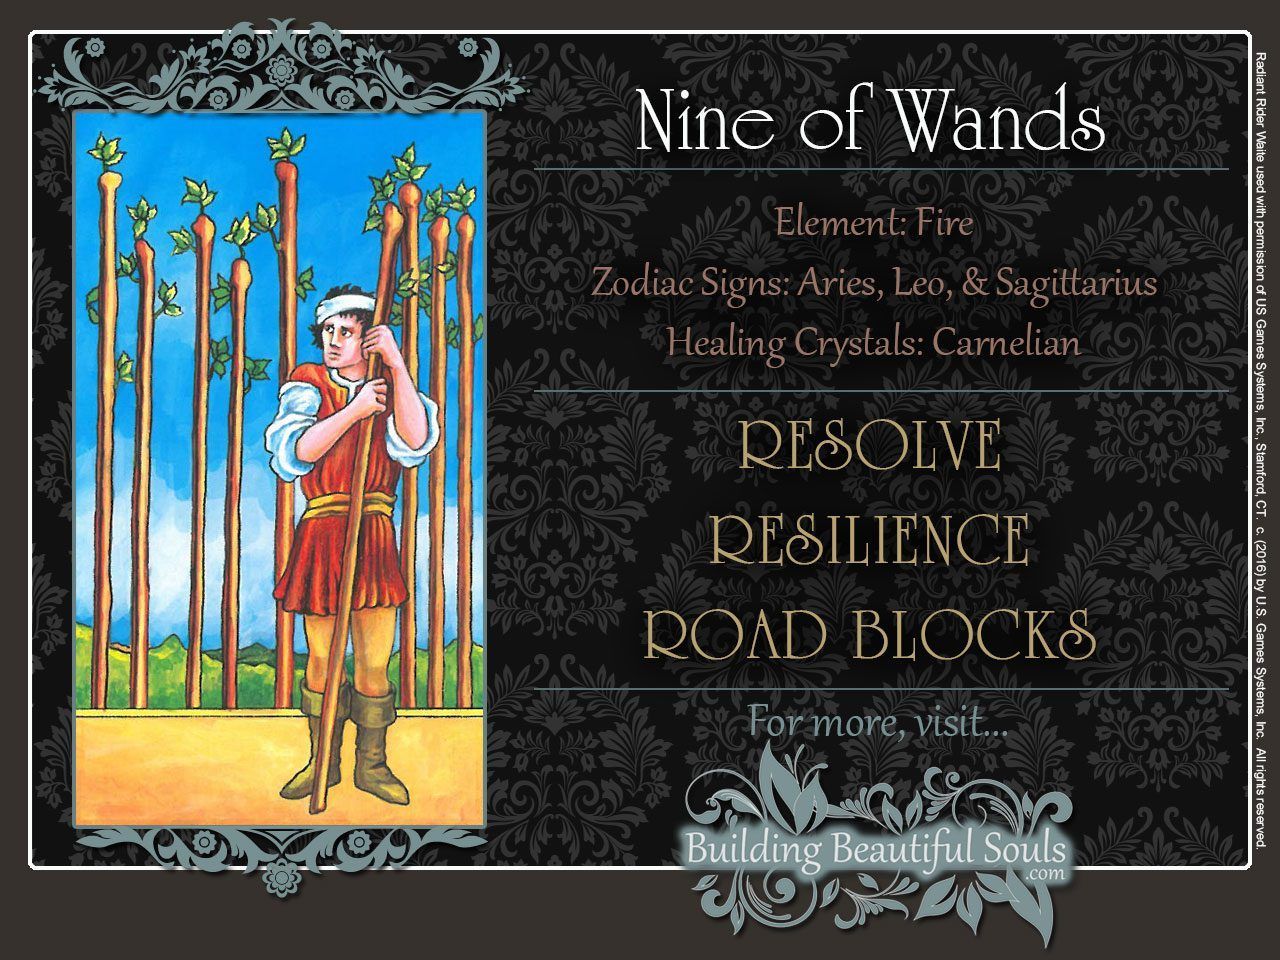 What zodiac is Ace of Wands?